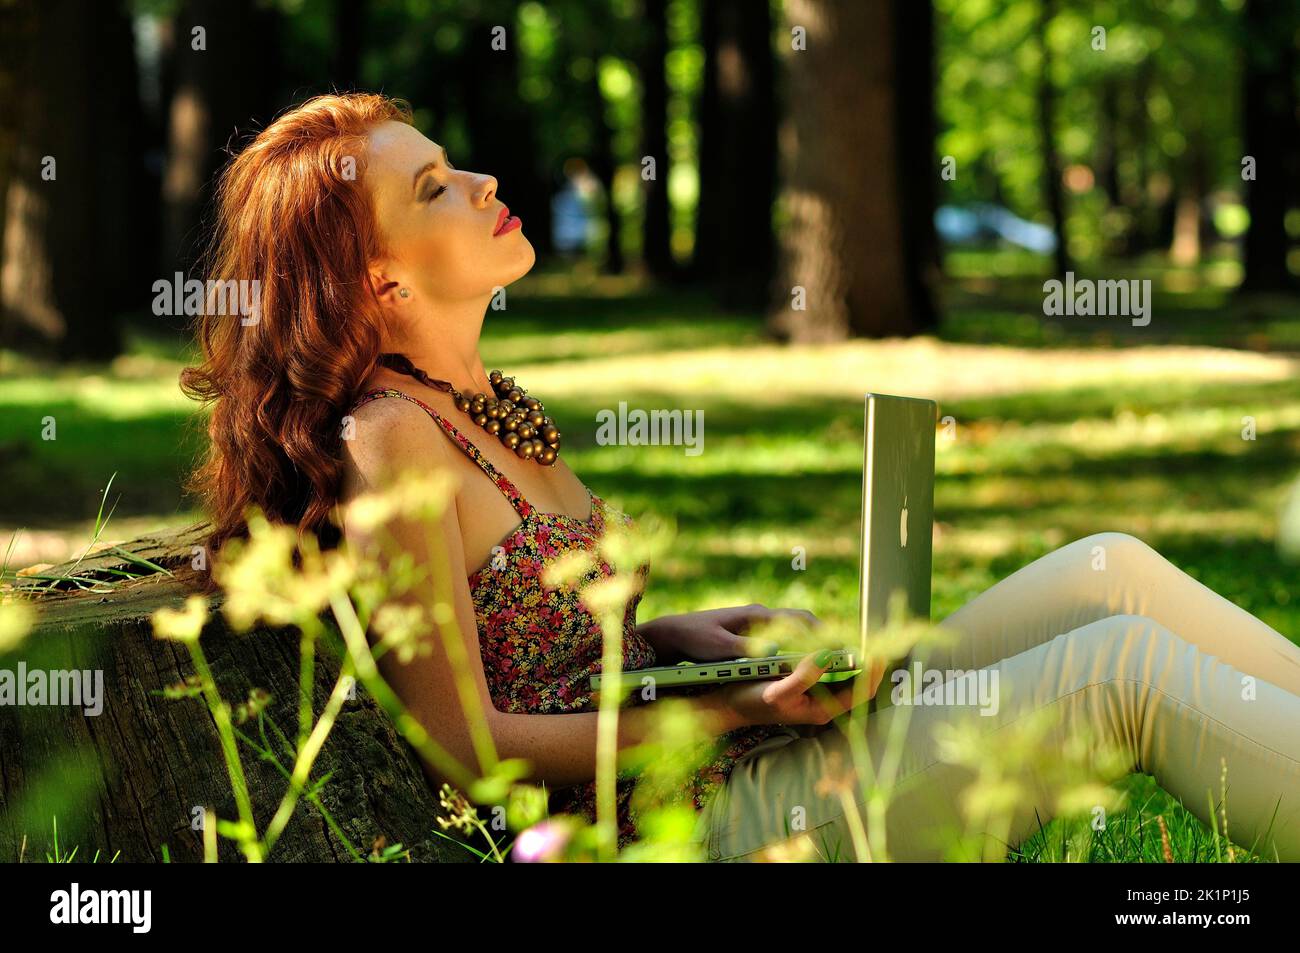 beauty, girl, laptop, mobile, outdoor, redhead, young,pure beauty, natural, mental health, back to the school, influencer, dating, business, Stock Photo